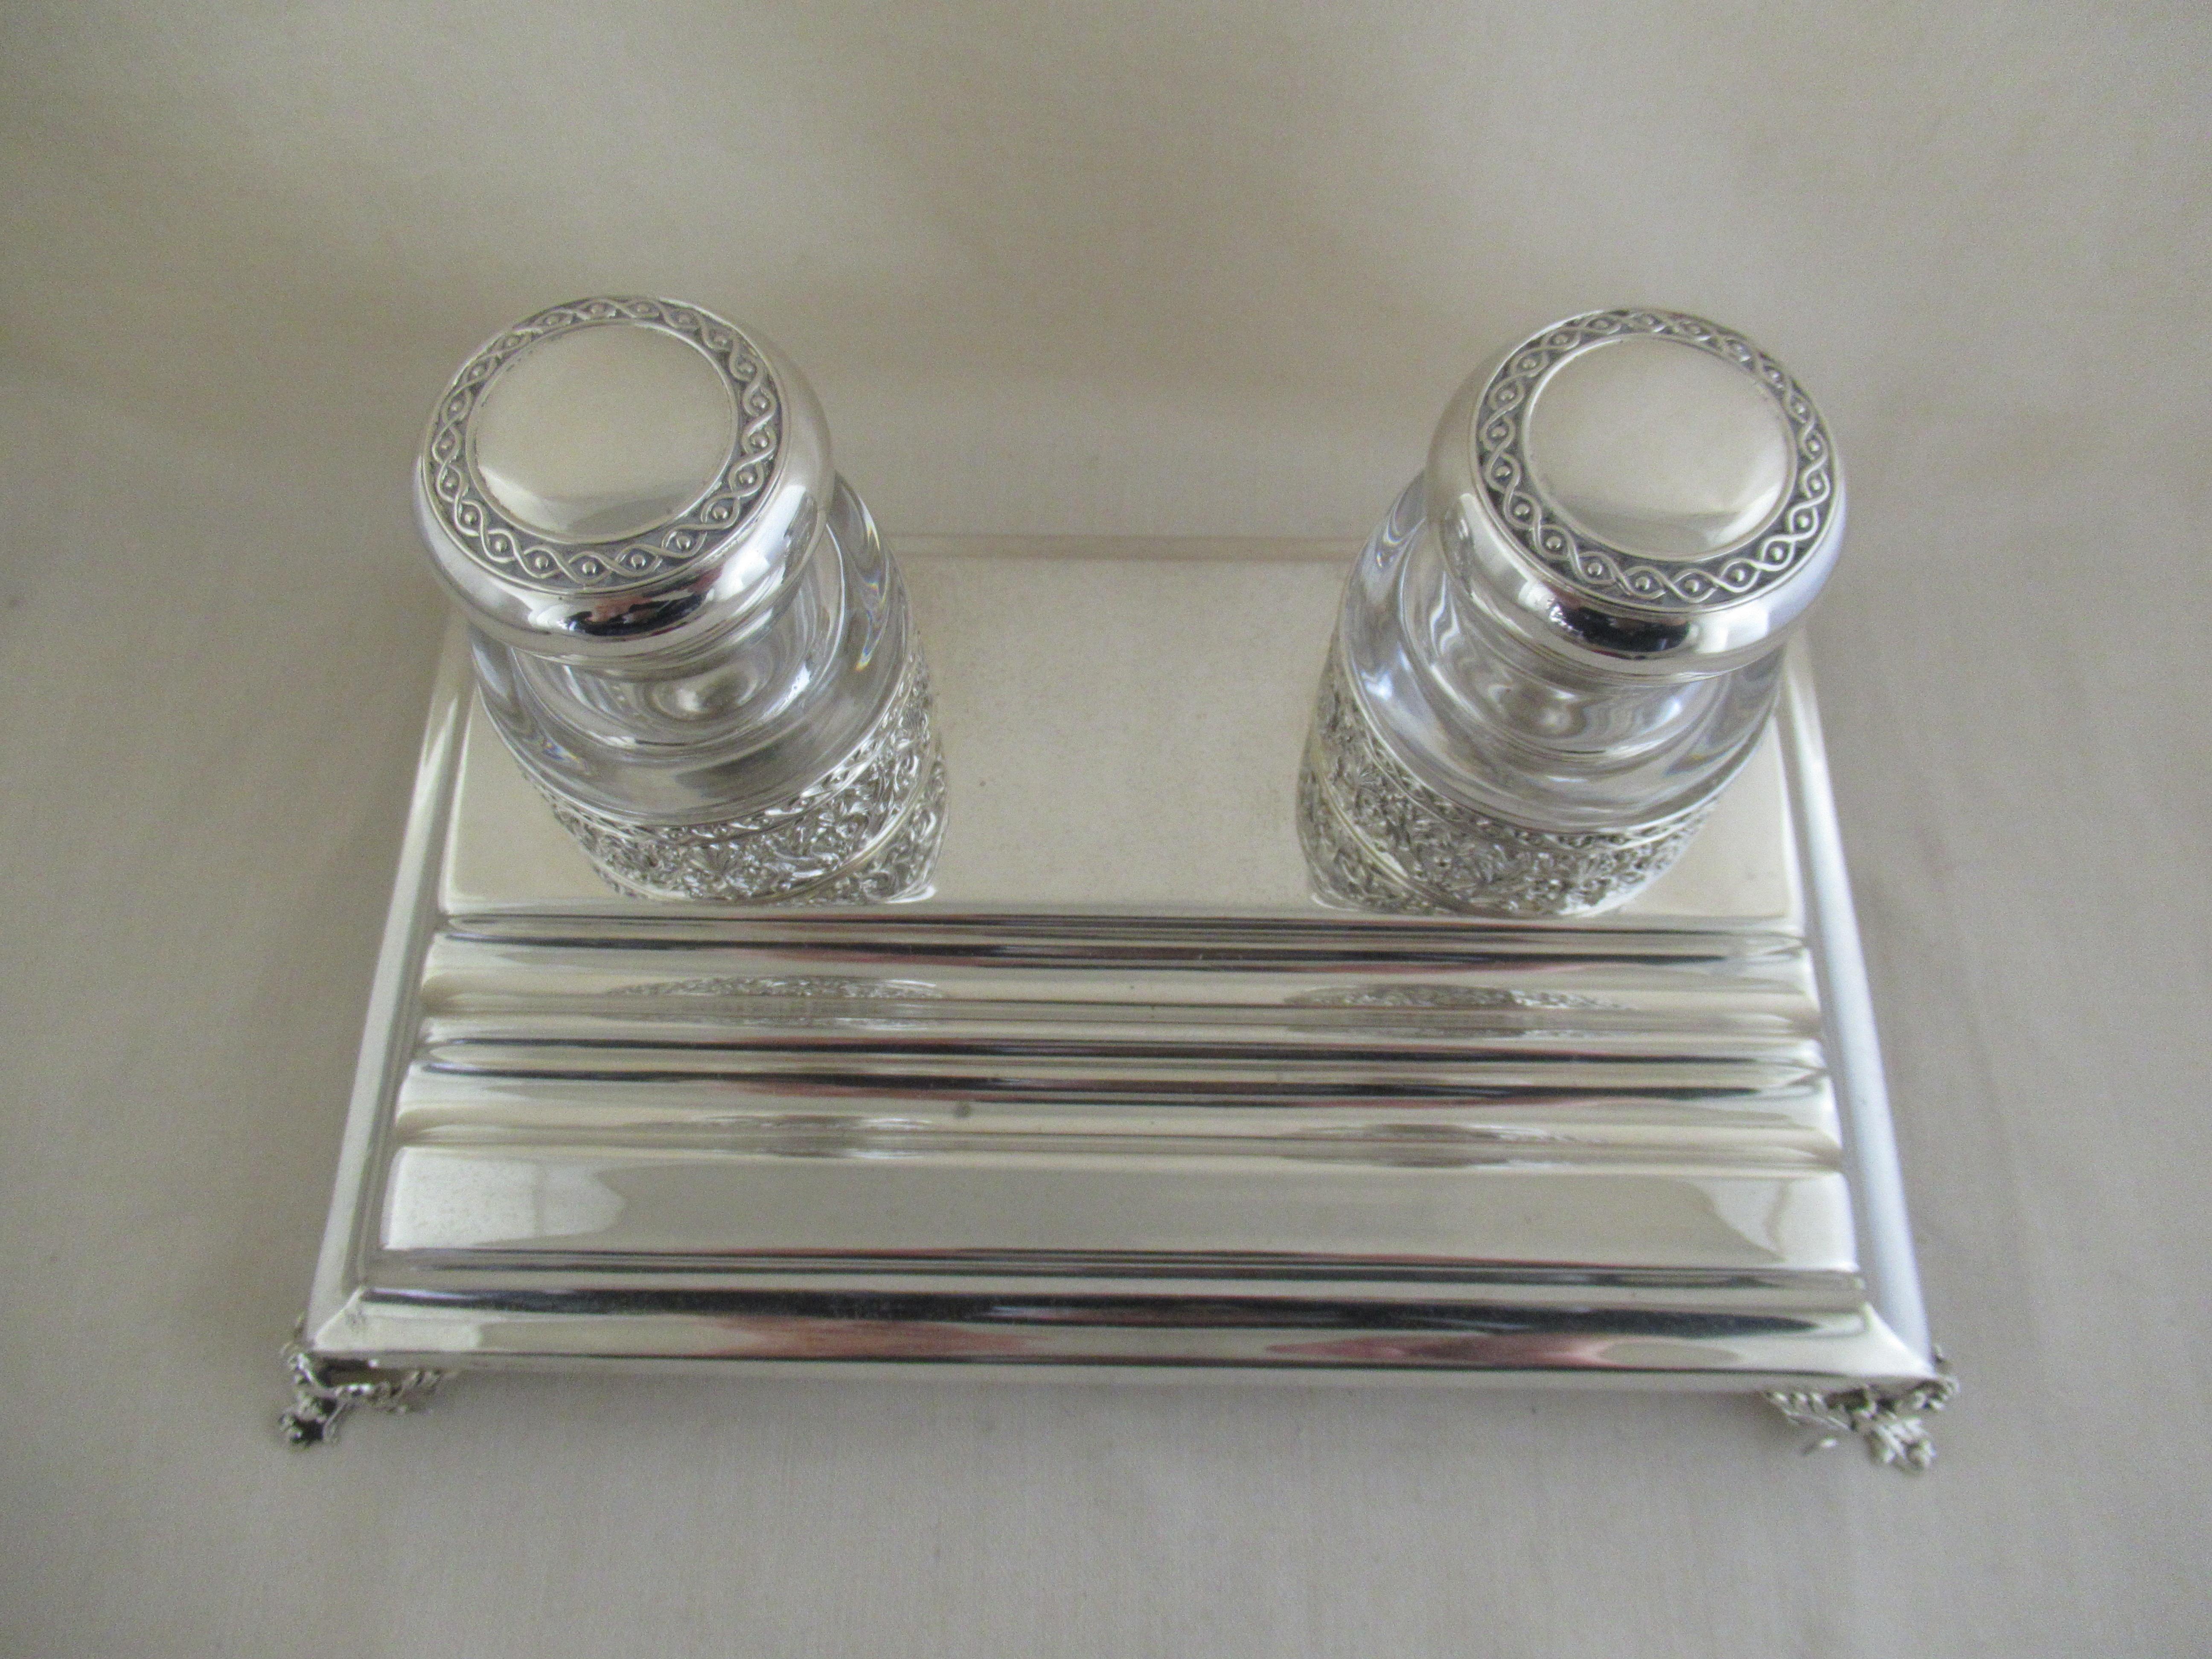 Antique Solid Silver DESK INK STAND
Made in Portugal, circa 1920 by TOPAZIO and marked with the sterling silver quality mark - 0,925, also with the Topazio trade mark - a shield with F M over T

A superb, rectangular pen stand with two pen